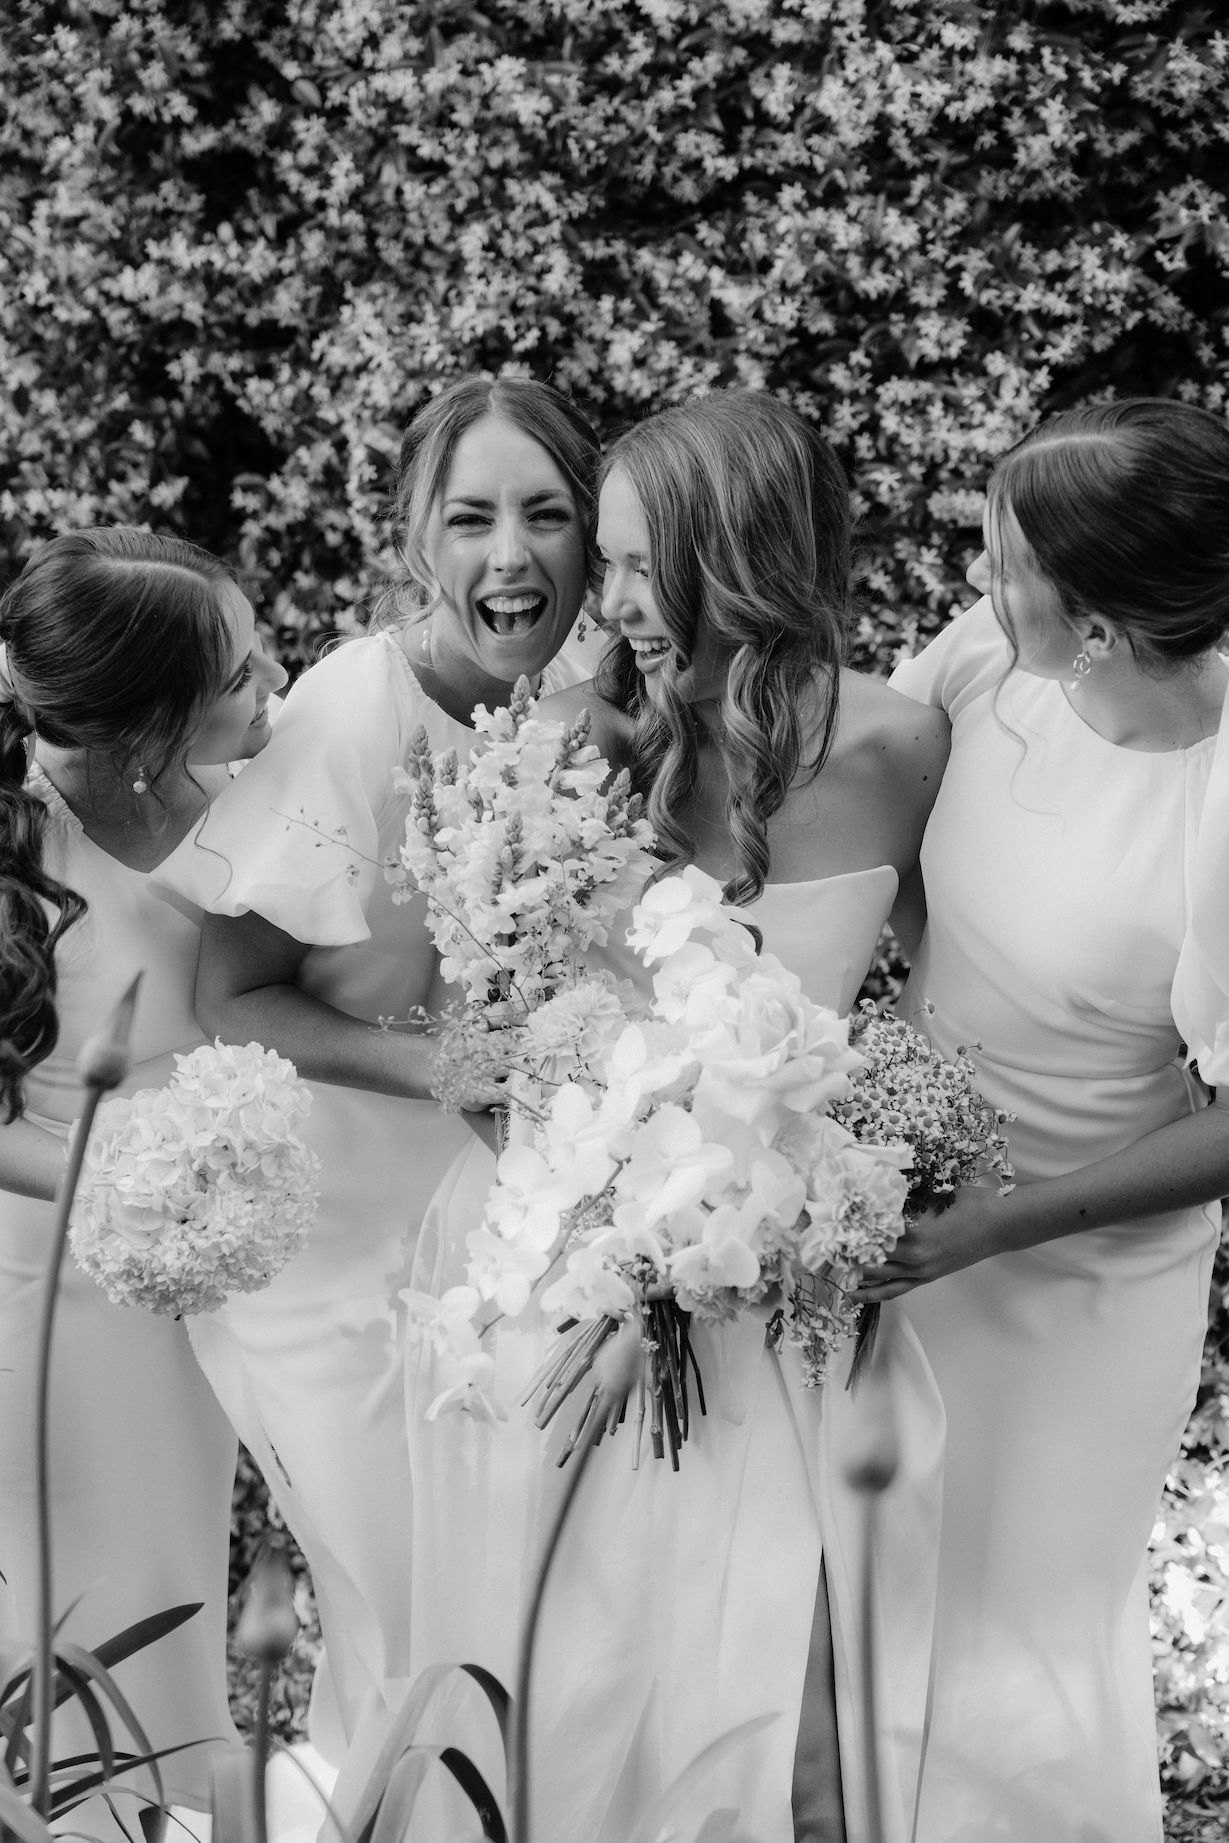 Bride and bridesmaids laughing together